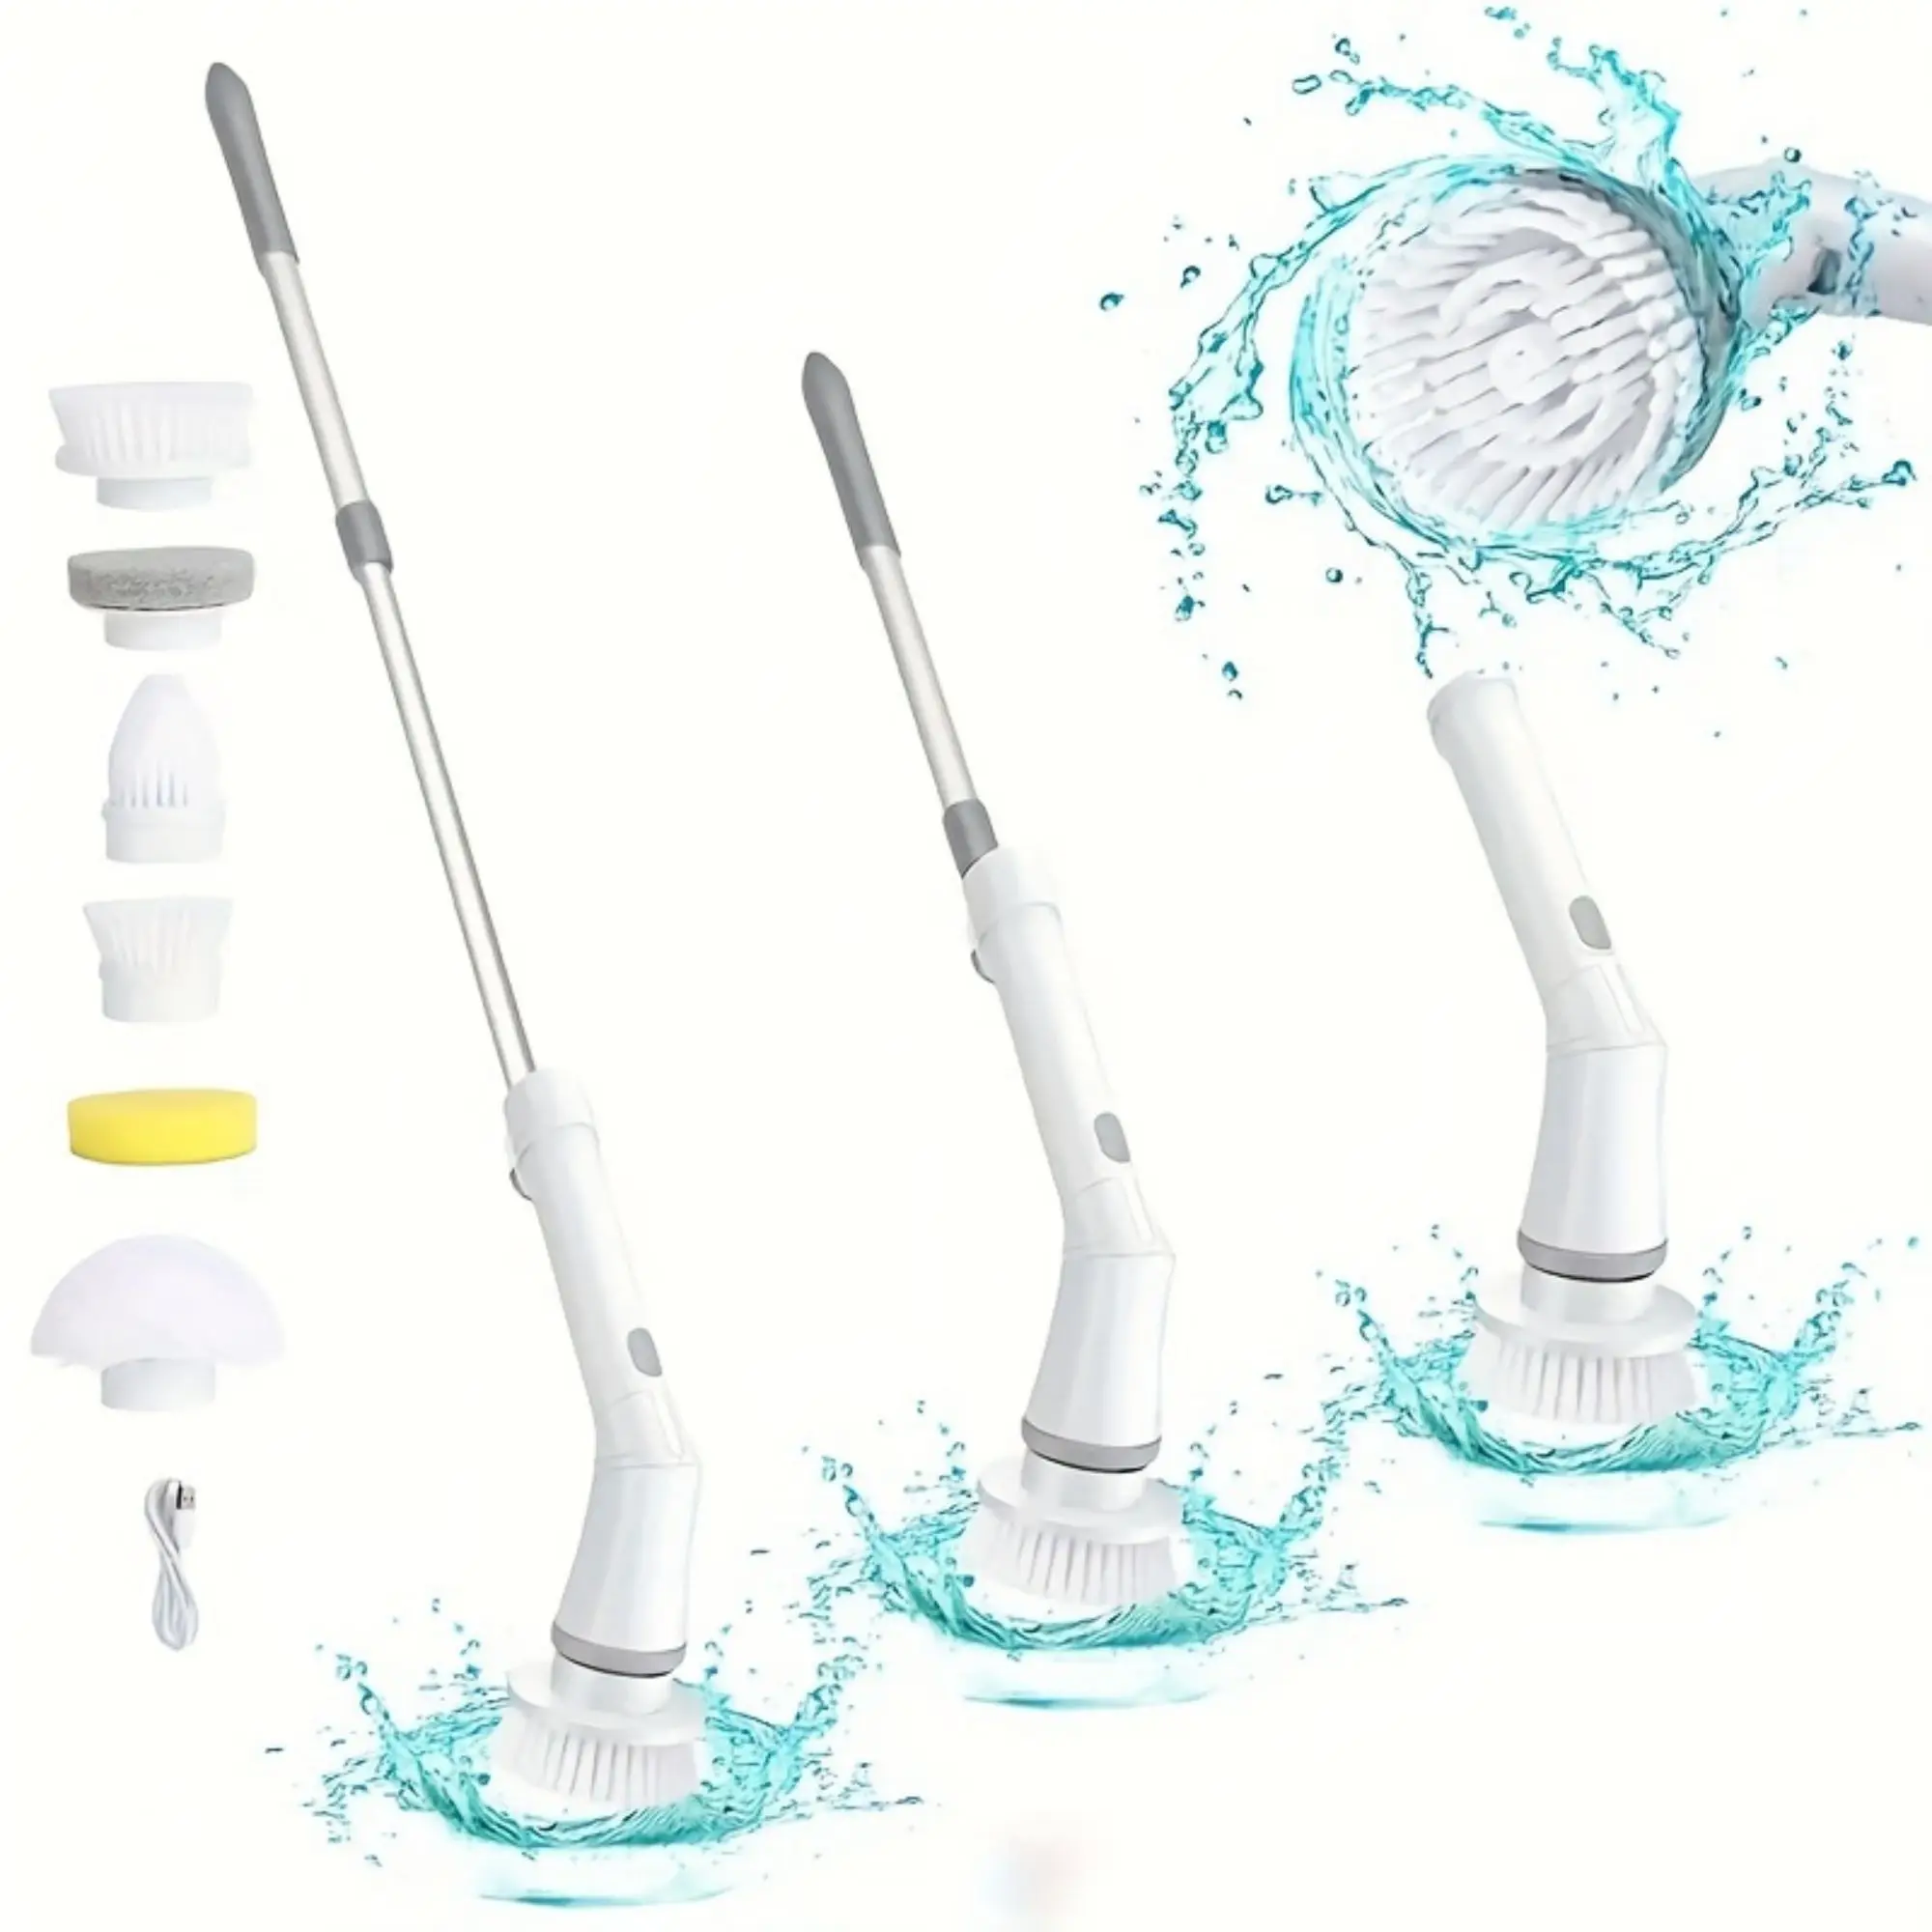 Electric Spin Scrubber, Power Cleaning Brush, Long Handled Shower Scrubber,  Tub Tile Scrubber With 6 Replaceable Brush Heads, Cordless Power Scrubber,  With Usb-c Charging Cord, For Bathroom, Kitchen, Floor, Tile, Tub, Cleaning